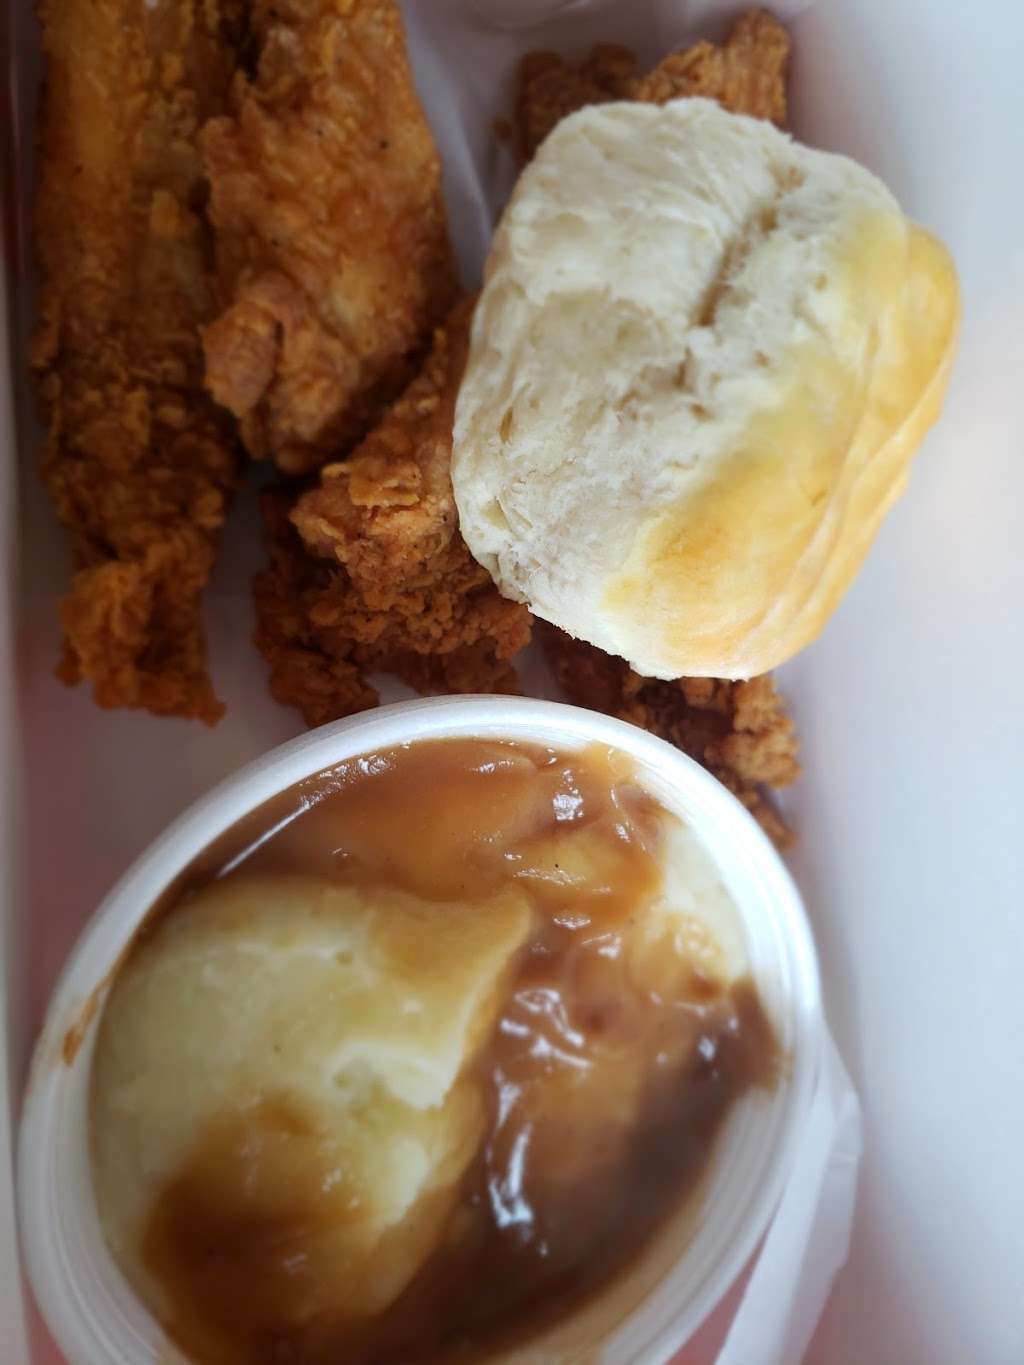 KFC | 3357 W Peterson Ave, Chicago, IL 60659, USA | Phone: (773) 463-4388